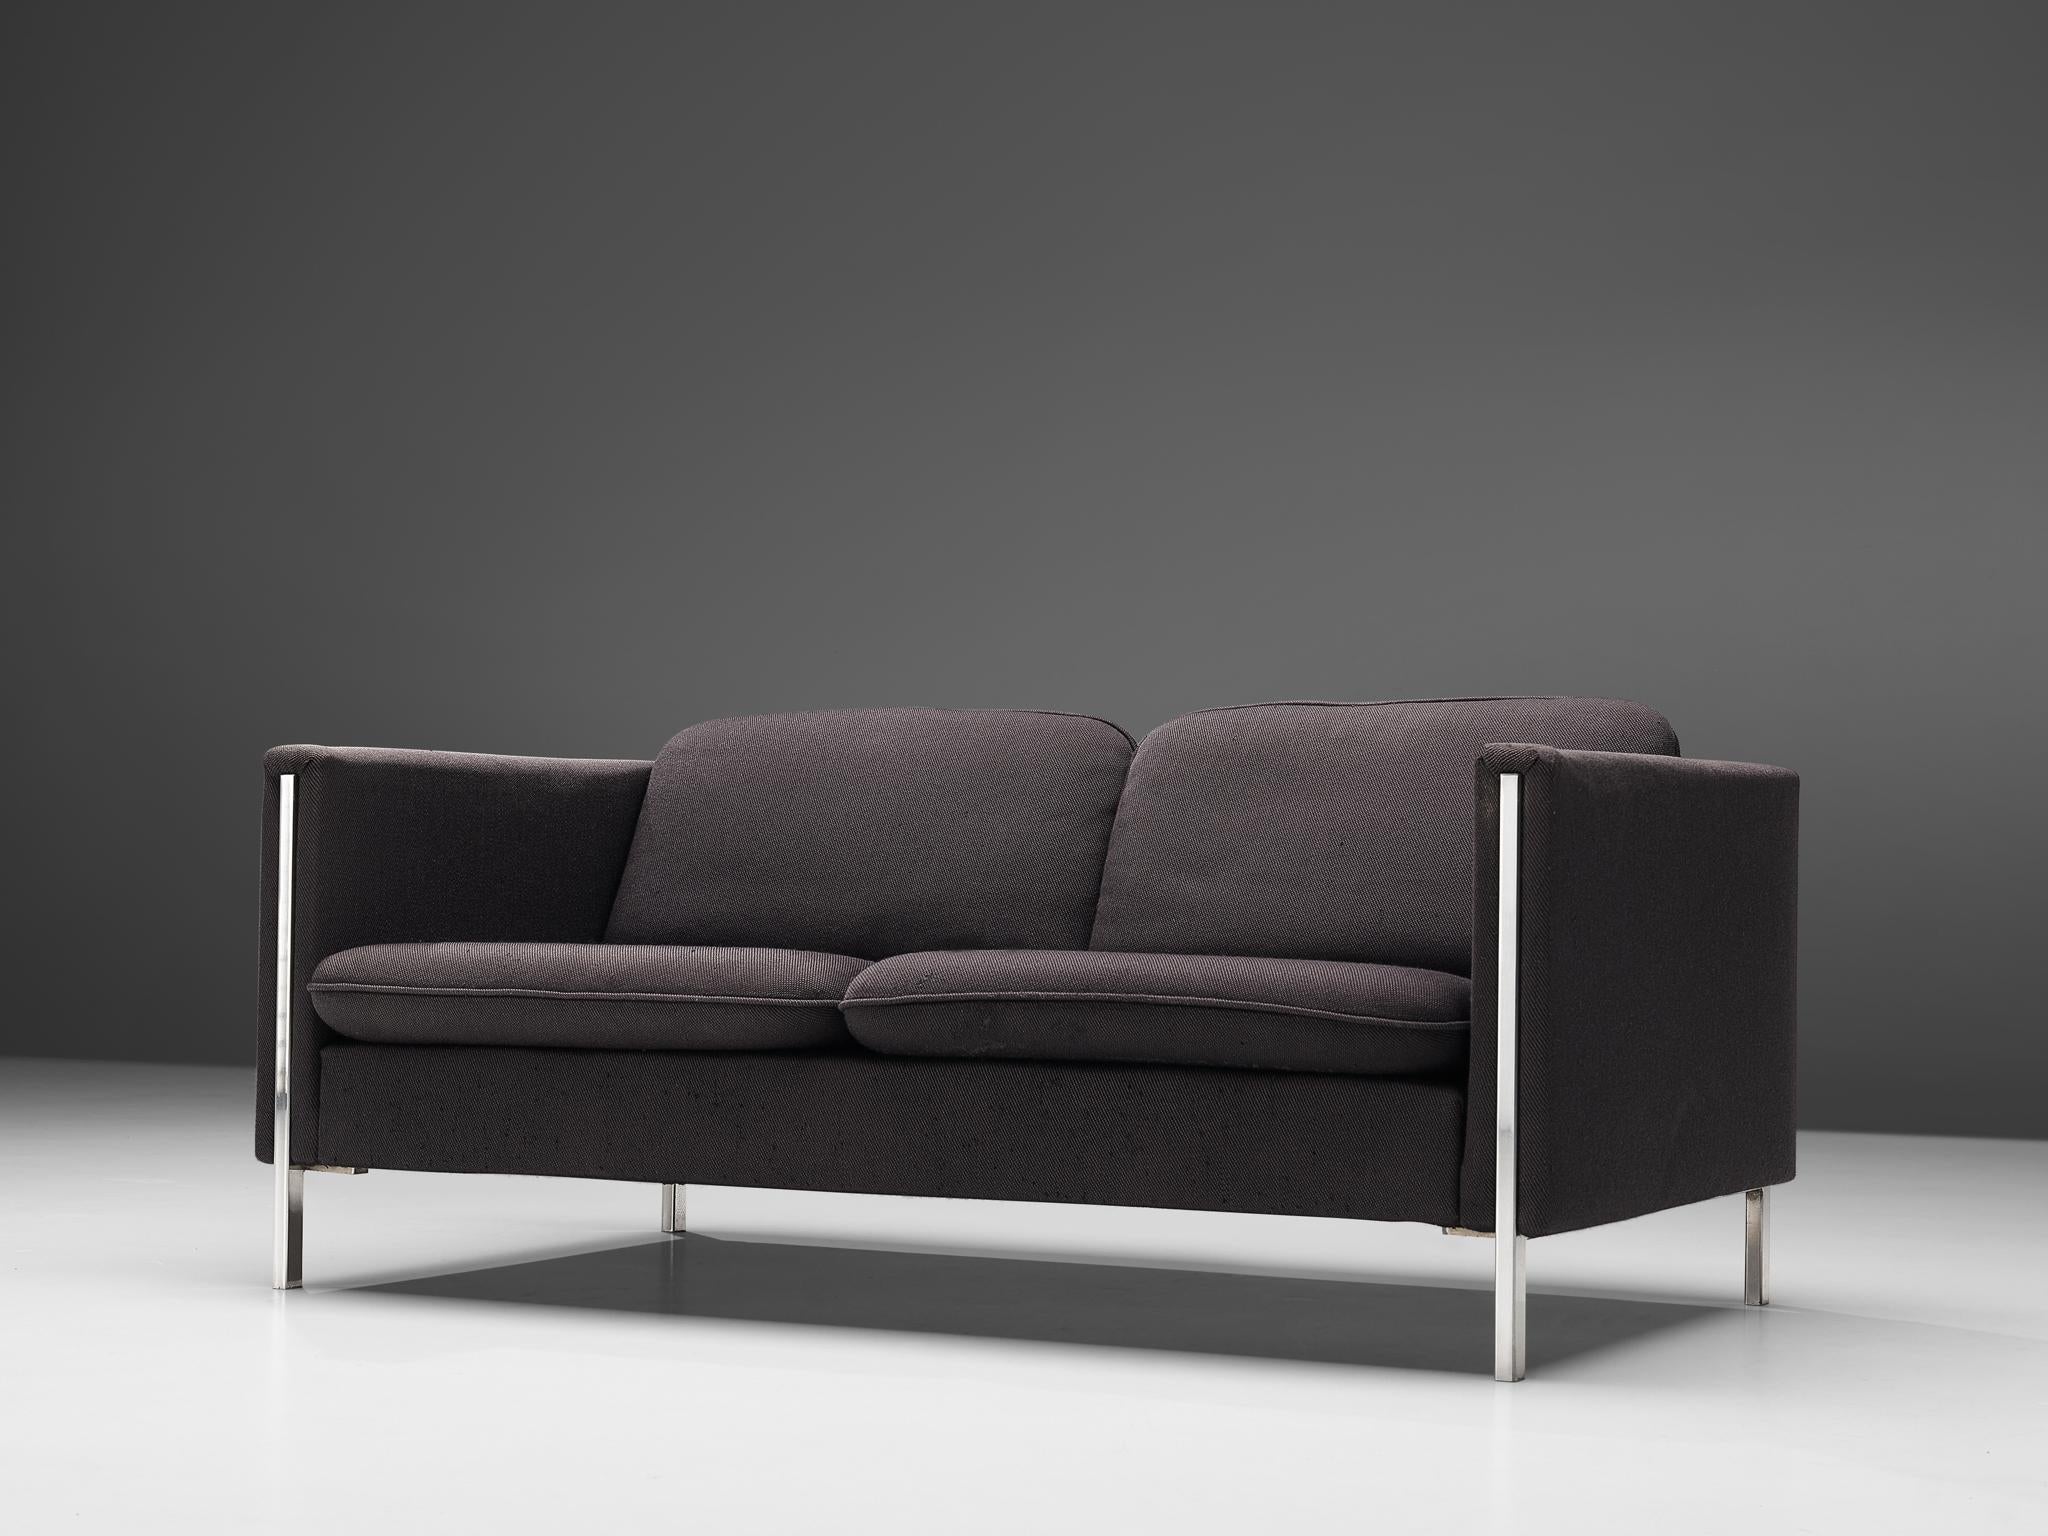 Pierre Paulin for Artifort, sofa ', fabric, steel, The Netherlands, 1962.

This tufted comfortable two-seat sofa shows elegant steel details. The combination of steel and the black upholstery gives this sofa it's modern and sophisticated look. The